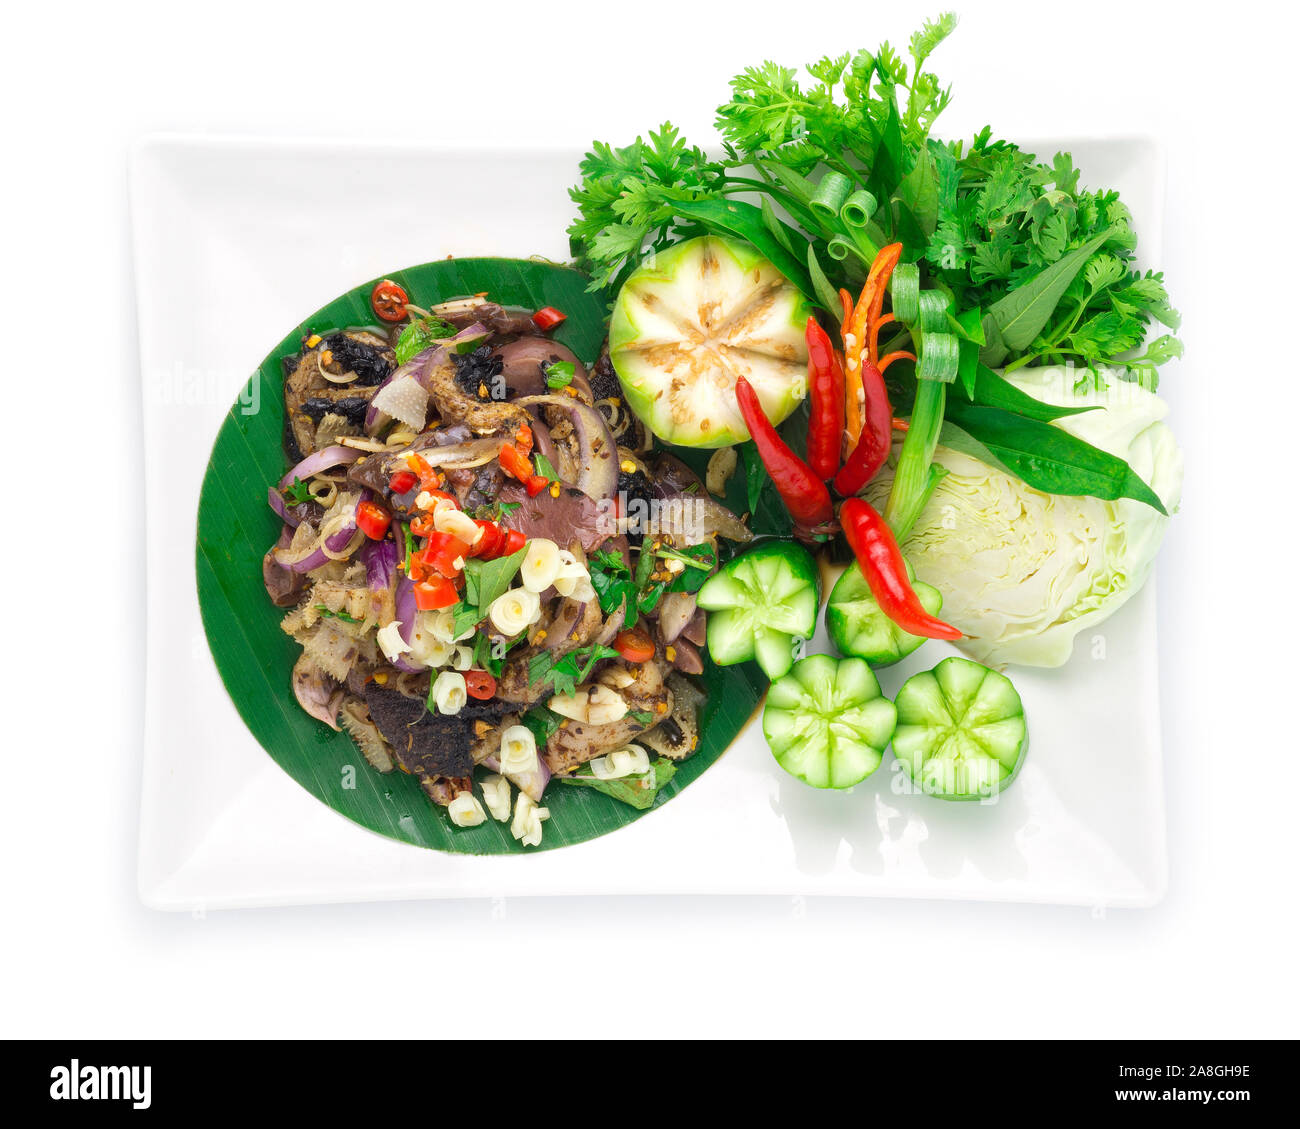 Spicy Raw Offal Beef Salad with ingredient Spicy Herbs Thai Food Popular in Northern Style decorate with carved cucumber and vegetables top view Stock Photo